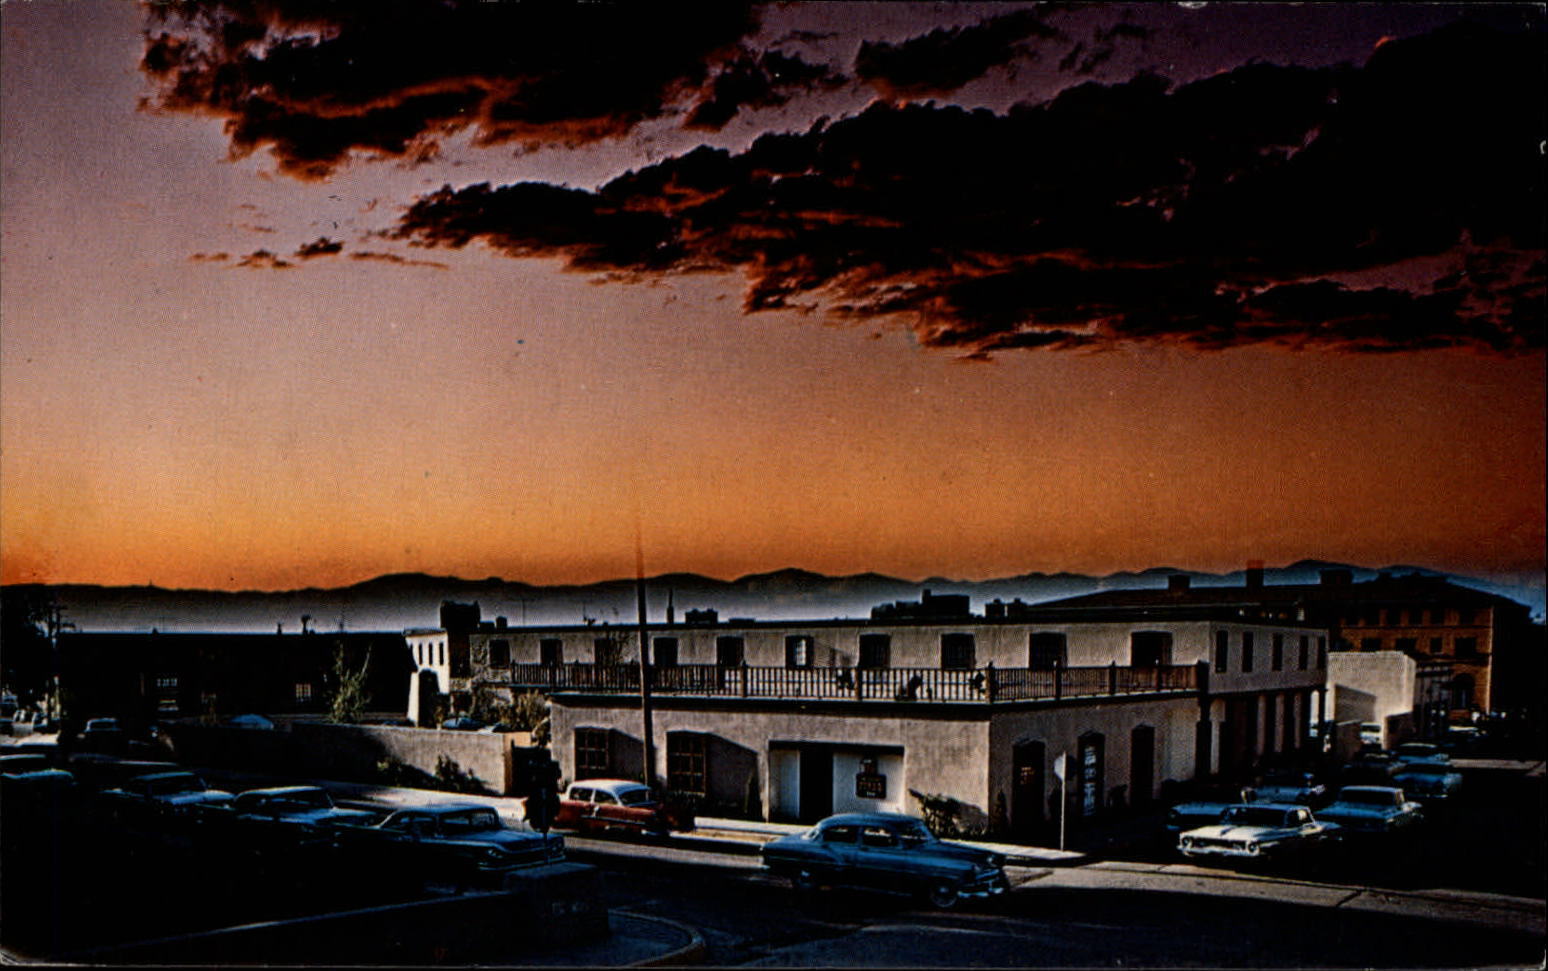 Inn of the Governors Santa Fe New Mexico ~ sunset 1950s cars ~ 1984 postcard